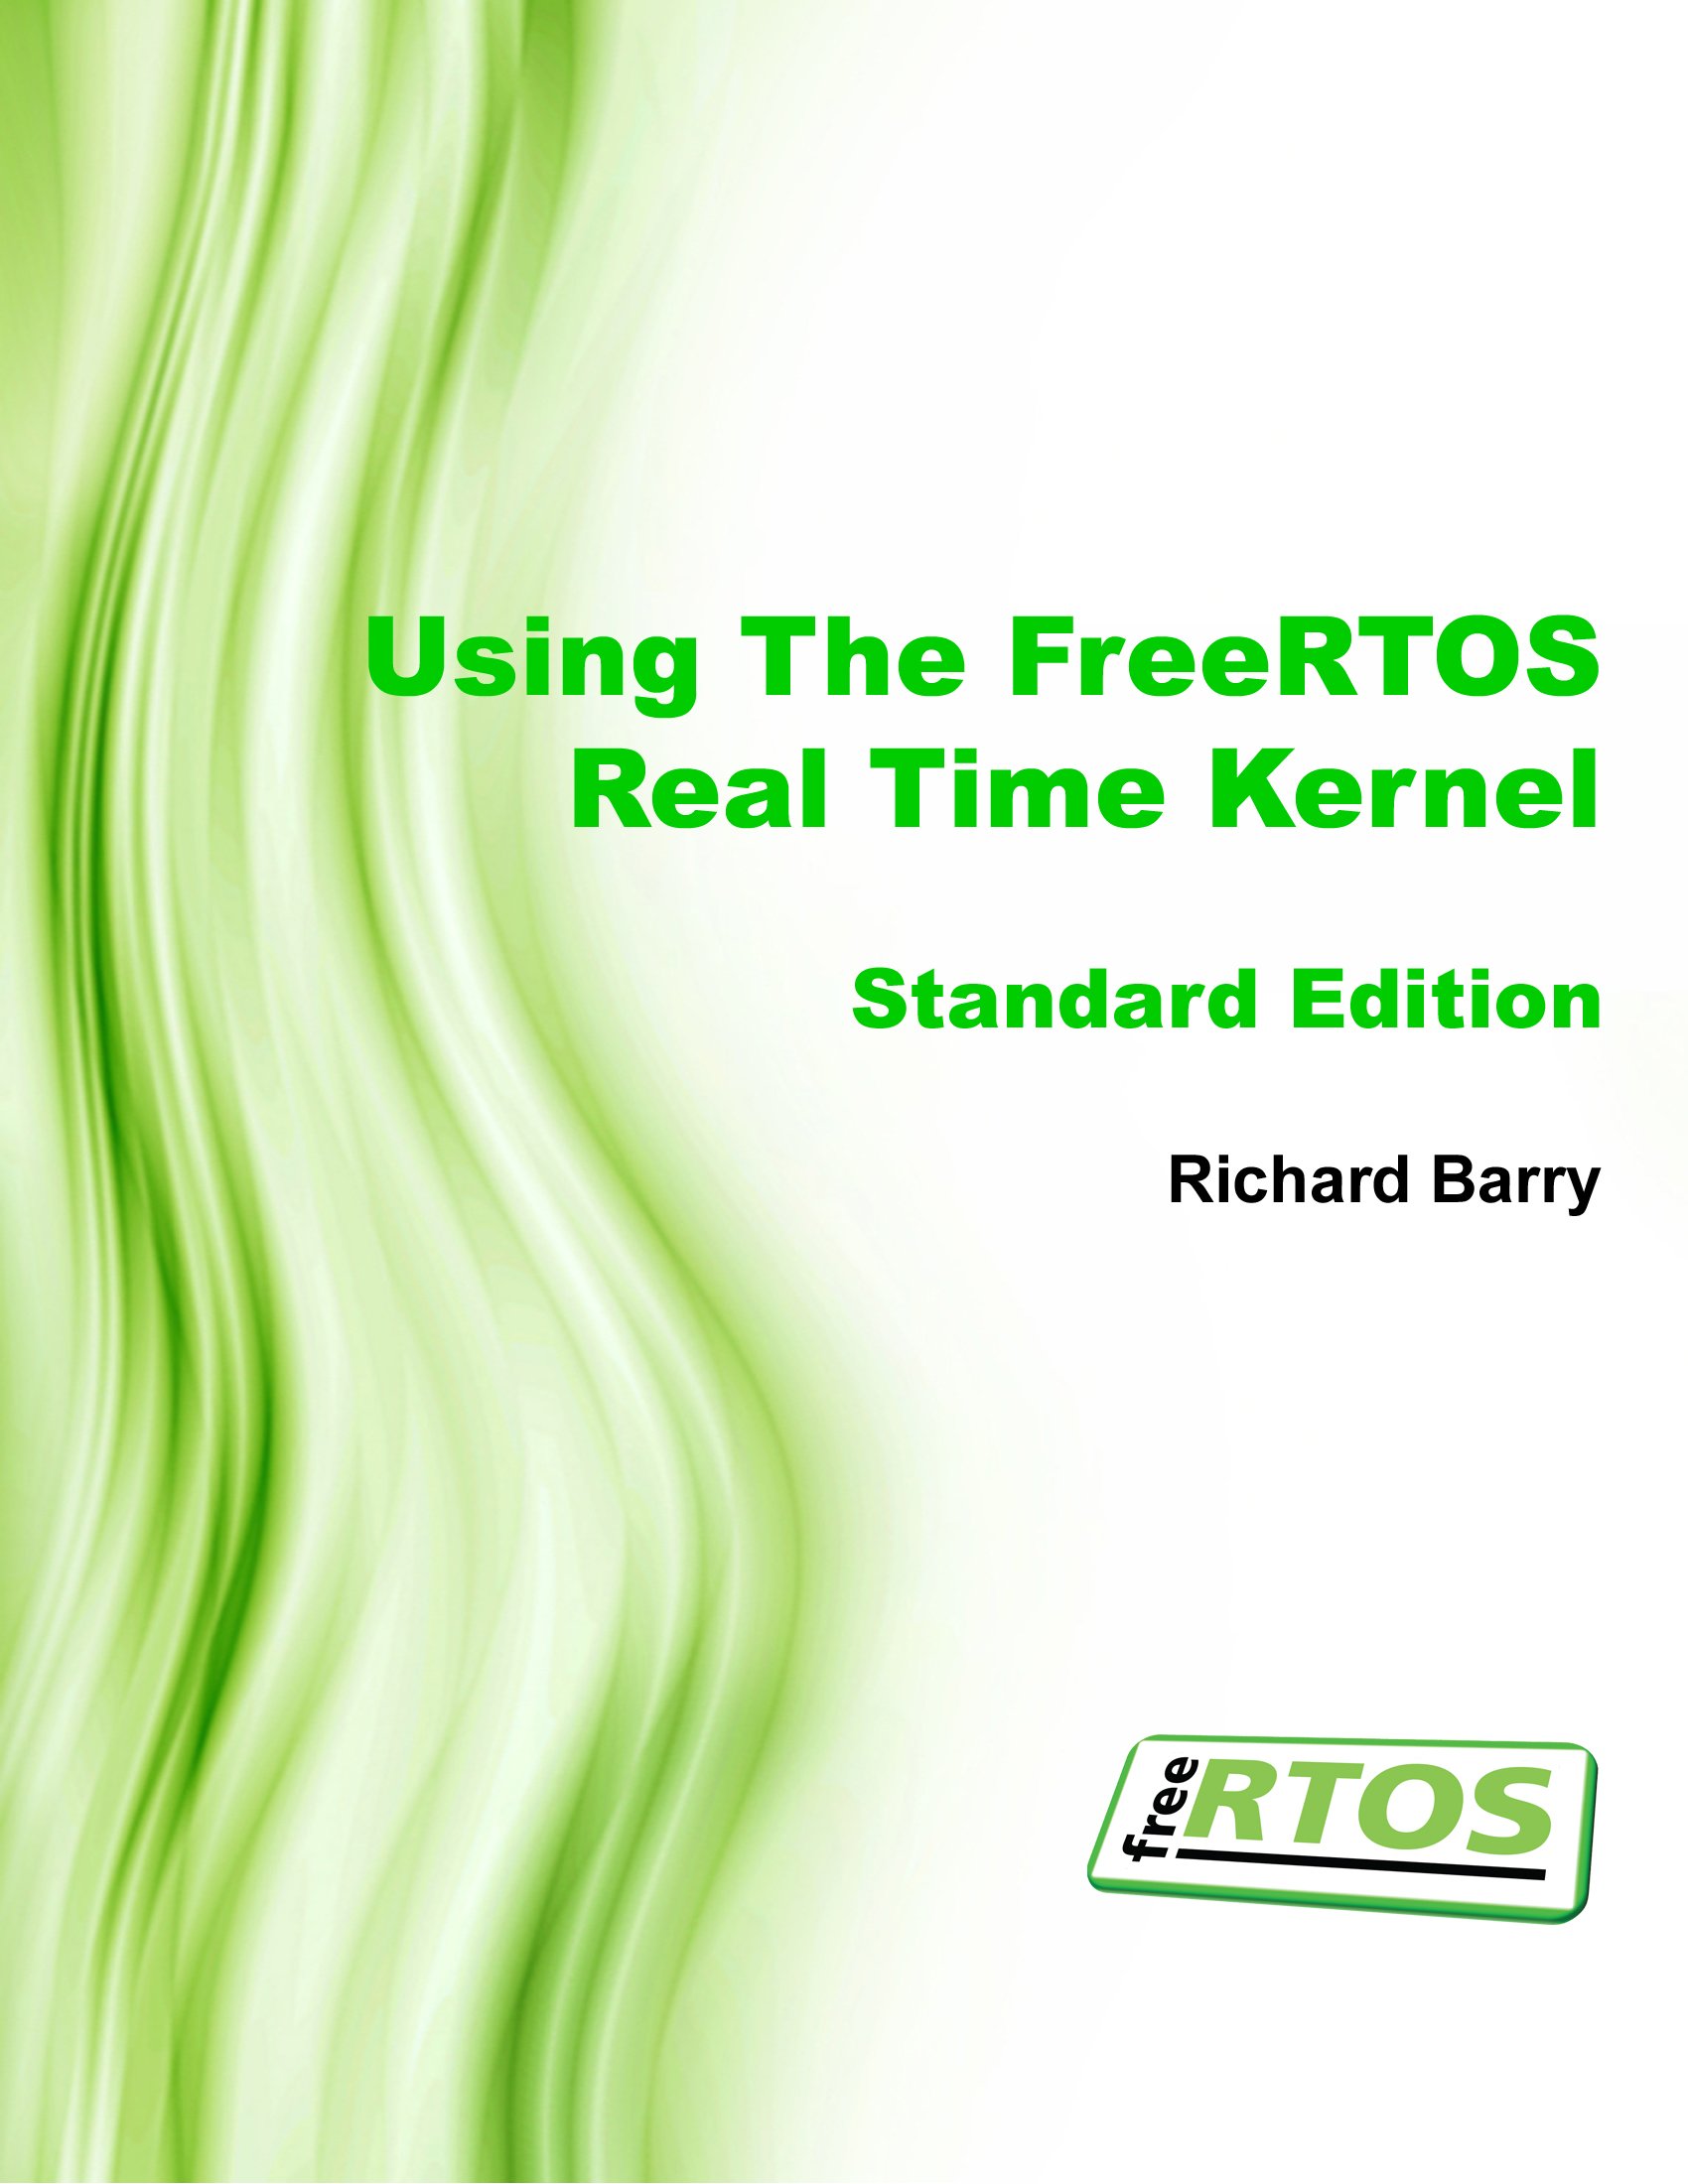 freertos kernel in tempo reale